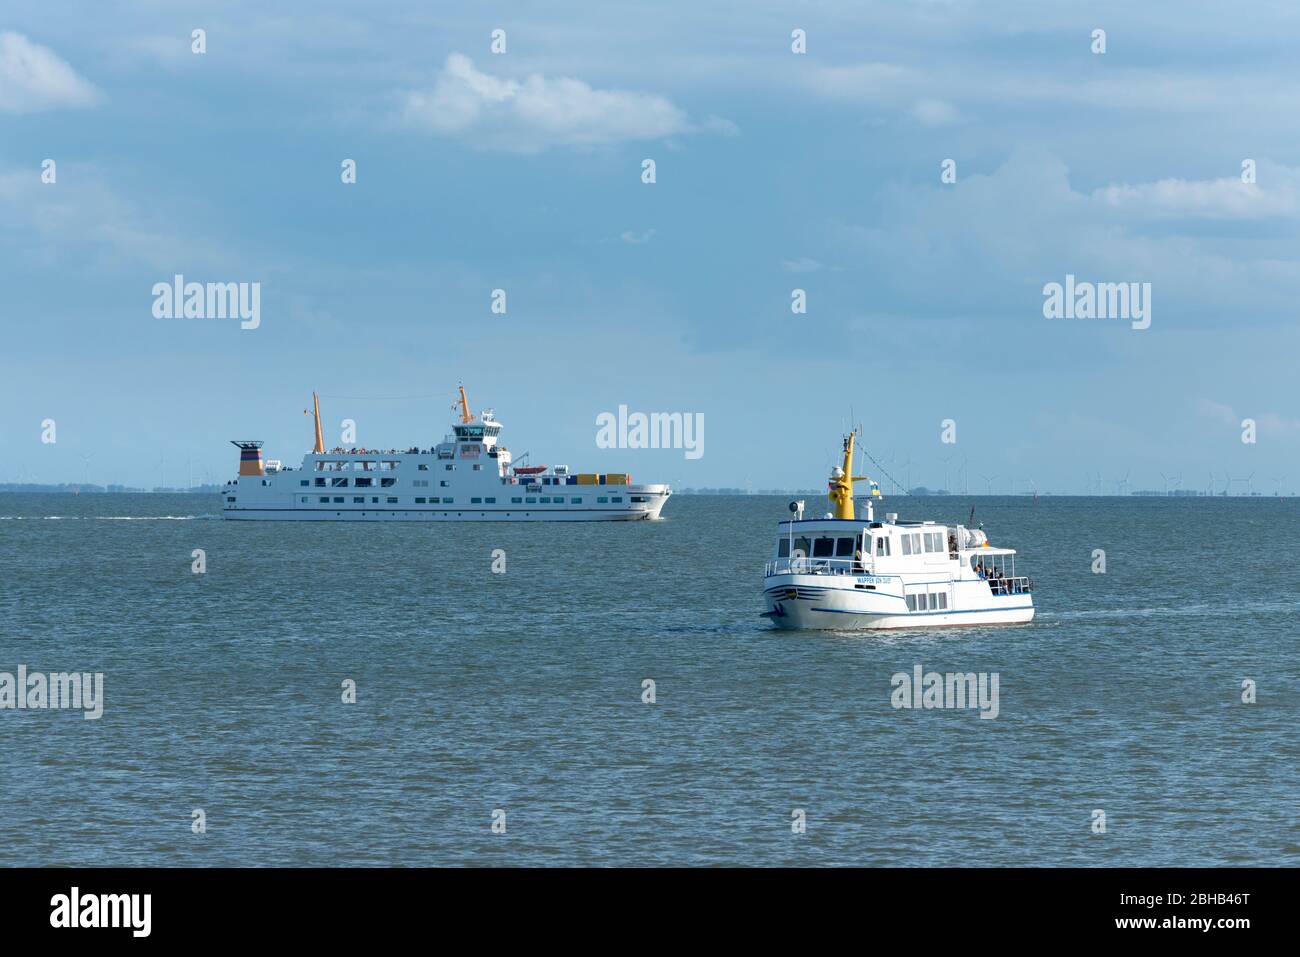 Germany, Lower Saxony, East Frisia, Juist, the 'Crest of Juist' offers excursions. Stock Photo